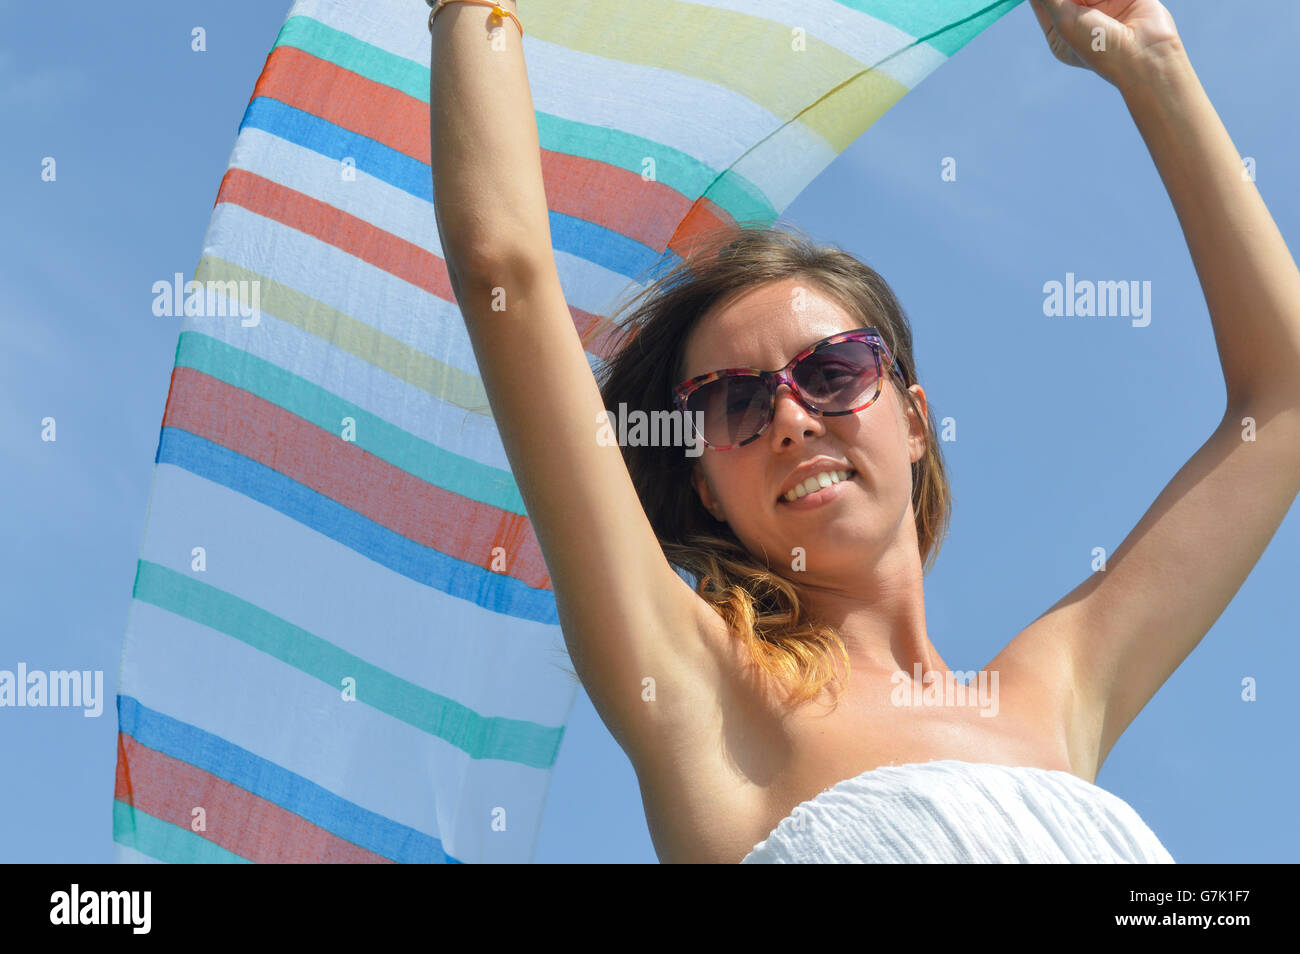 Girl waving a colorful scarf on seaside against blue sky Stock Photo